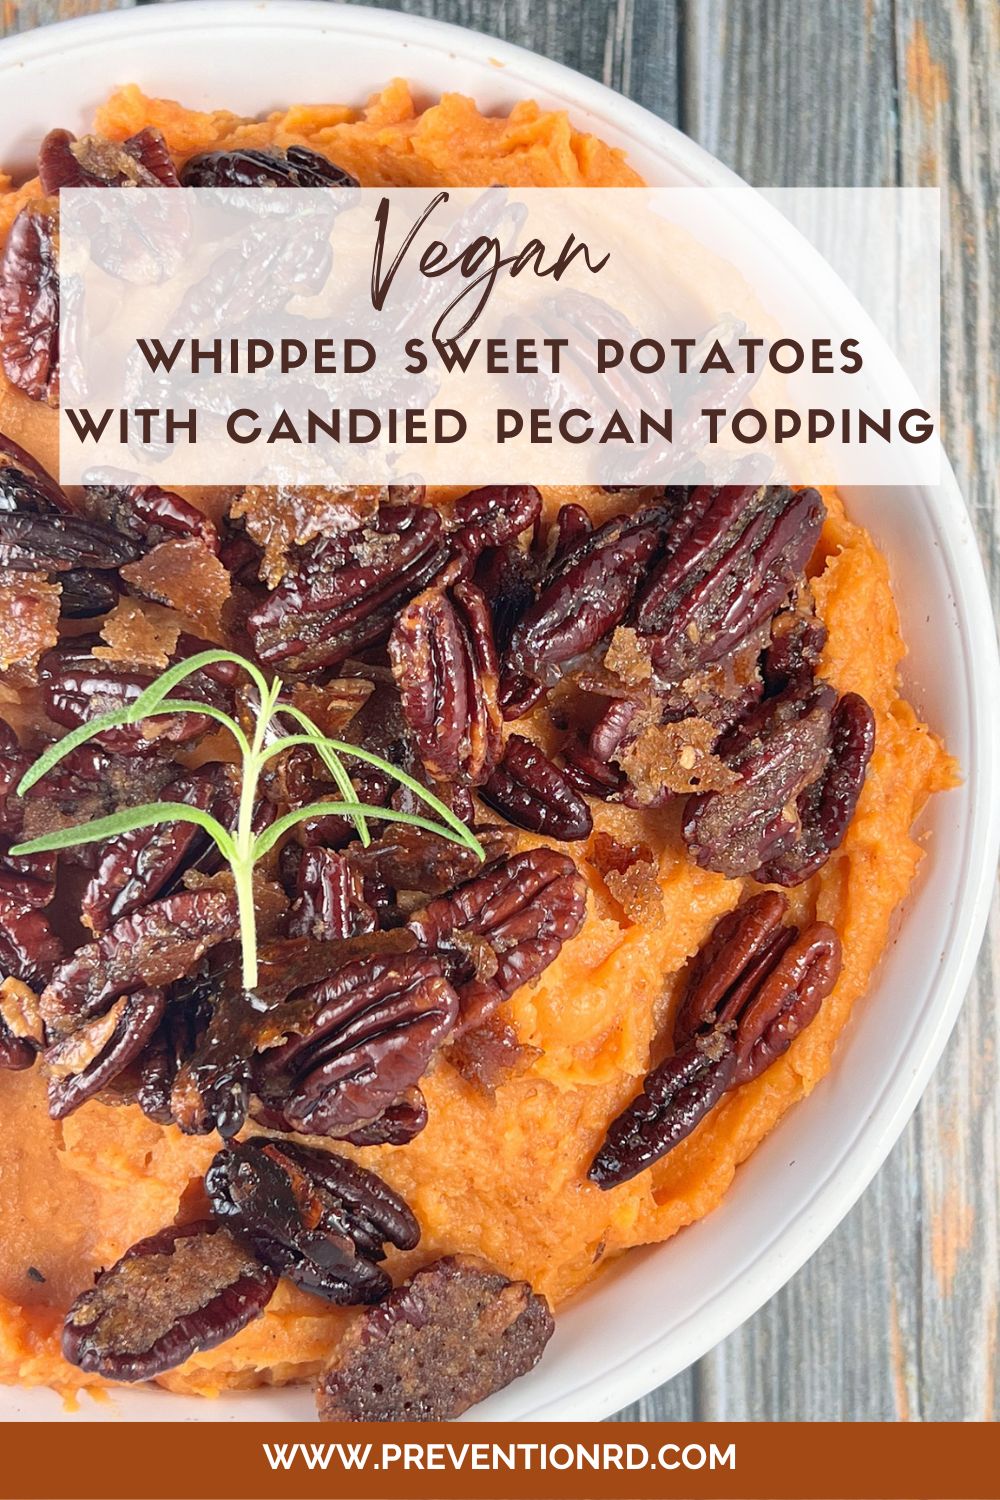 Vegan Whipped Sweet Potatoes with Candied Pecan Topping via @preventionrd